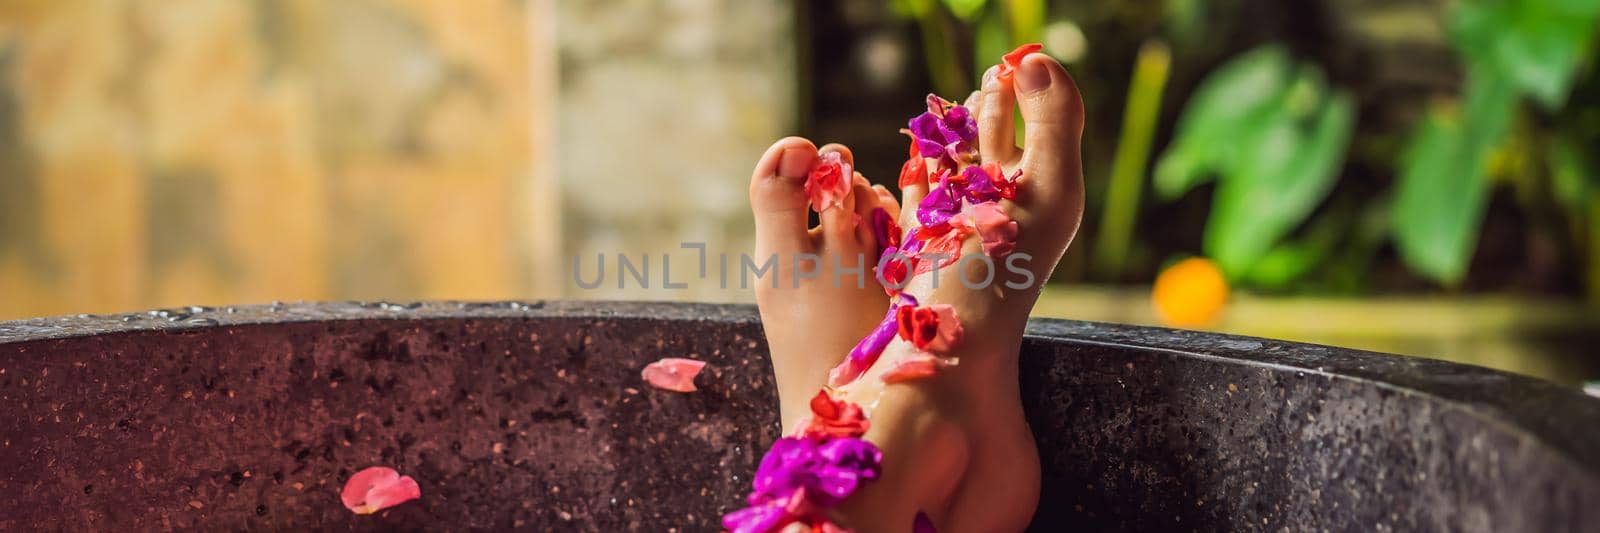 Attractive Young woman in bath with petals of tropical flowers and aroma oils. Spa treatments for skin rejuvenation. Alluring woman in Spa salon. Girl relaxing in bathtub with flower petals. Luxury. BANNER, LONG FORMAT